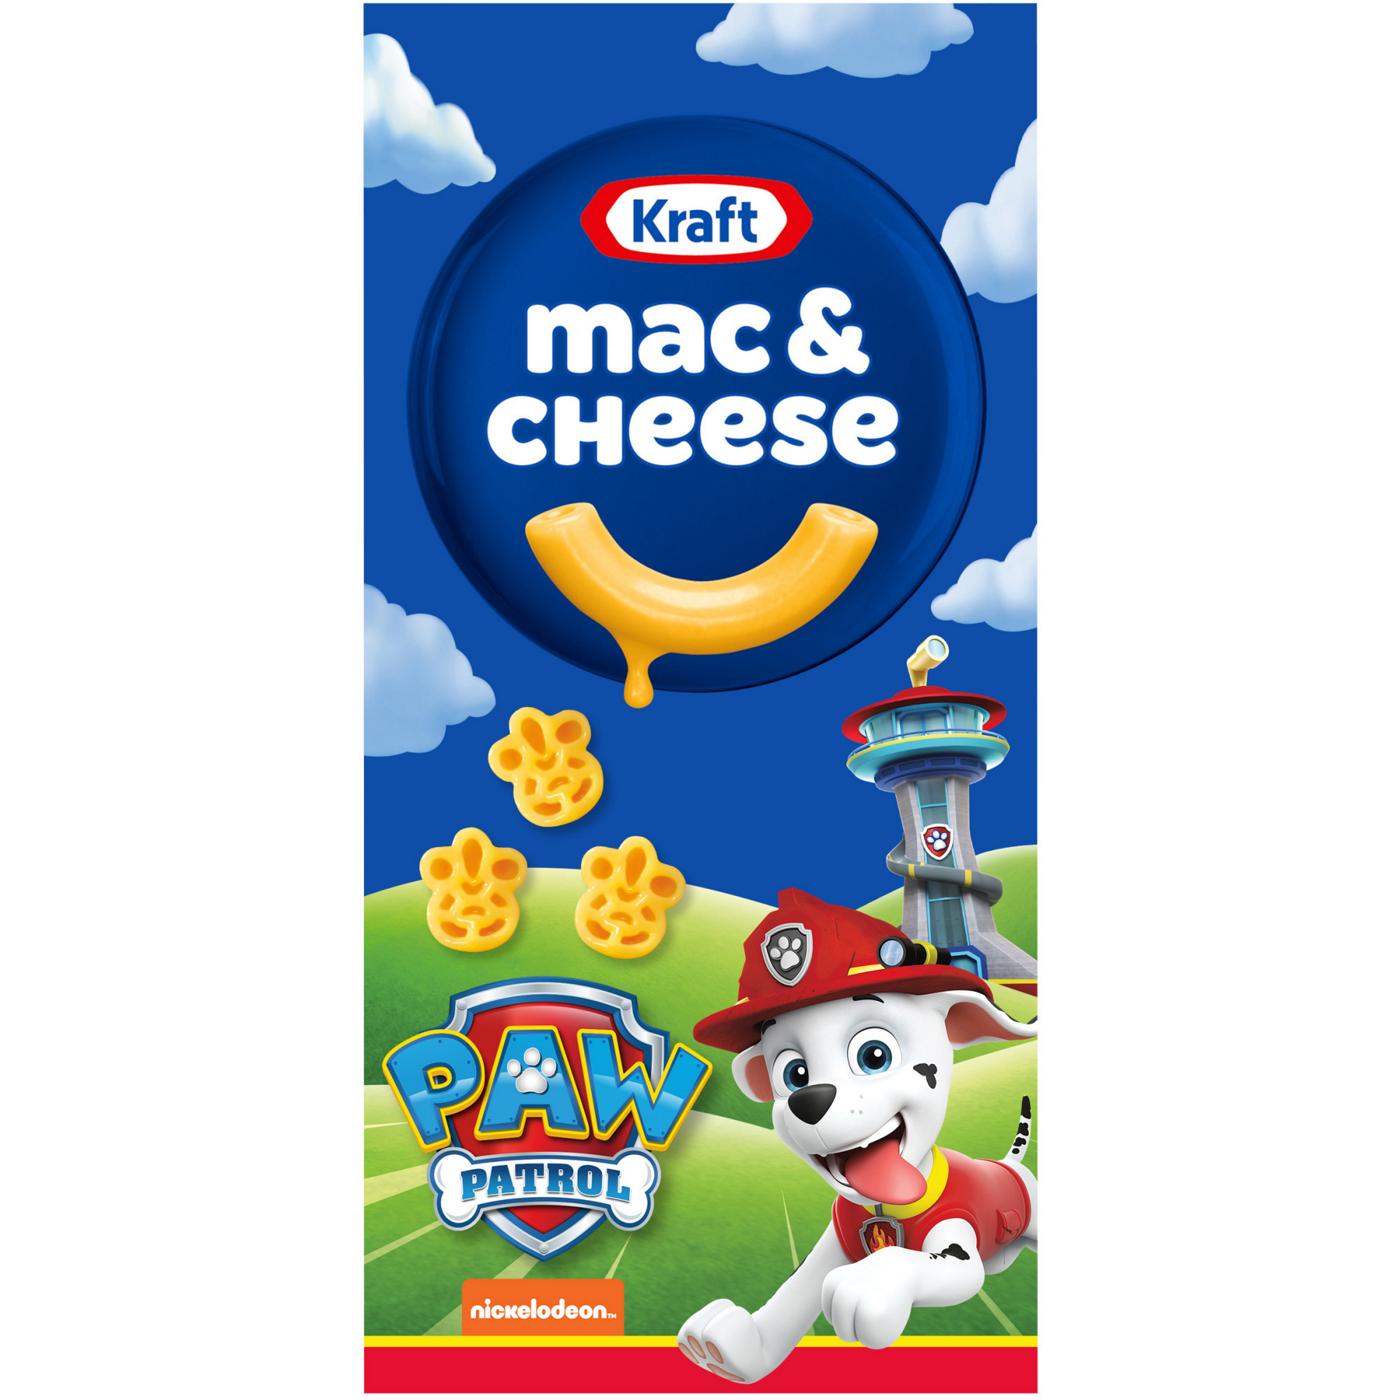 Kraft Paw Patrol Macaroni and Cheese Dinner - Shop Pantry Meals at H-E-B